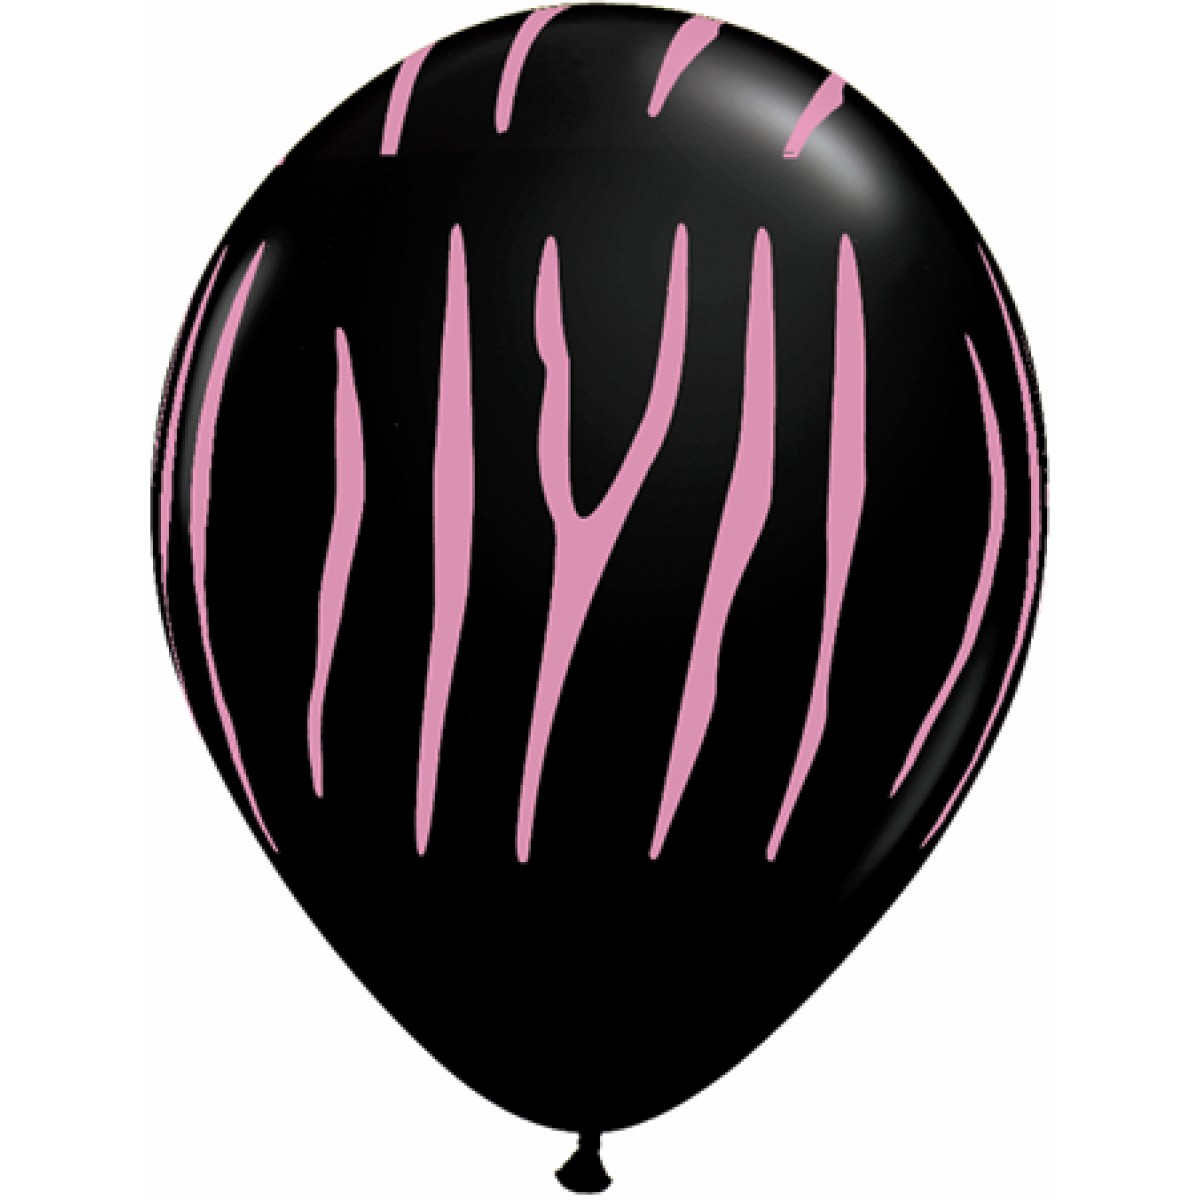 11" Zebra Print 100 count Onyx Black balloon with print in Pink ink